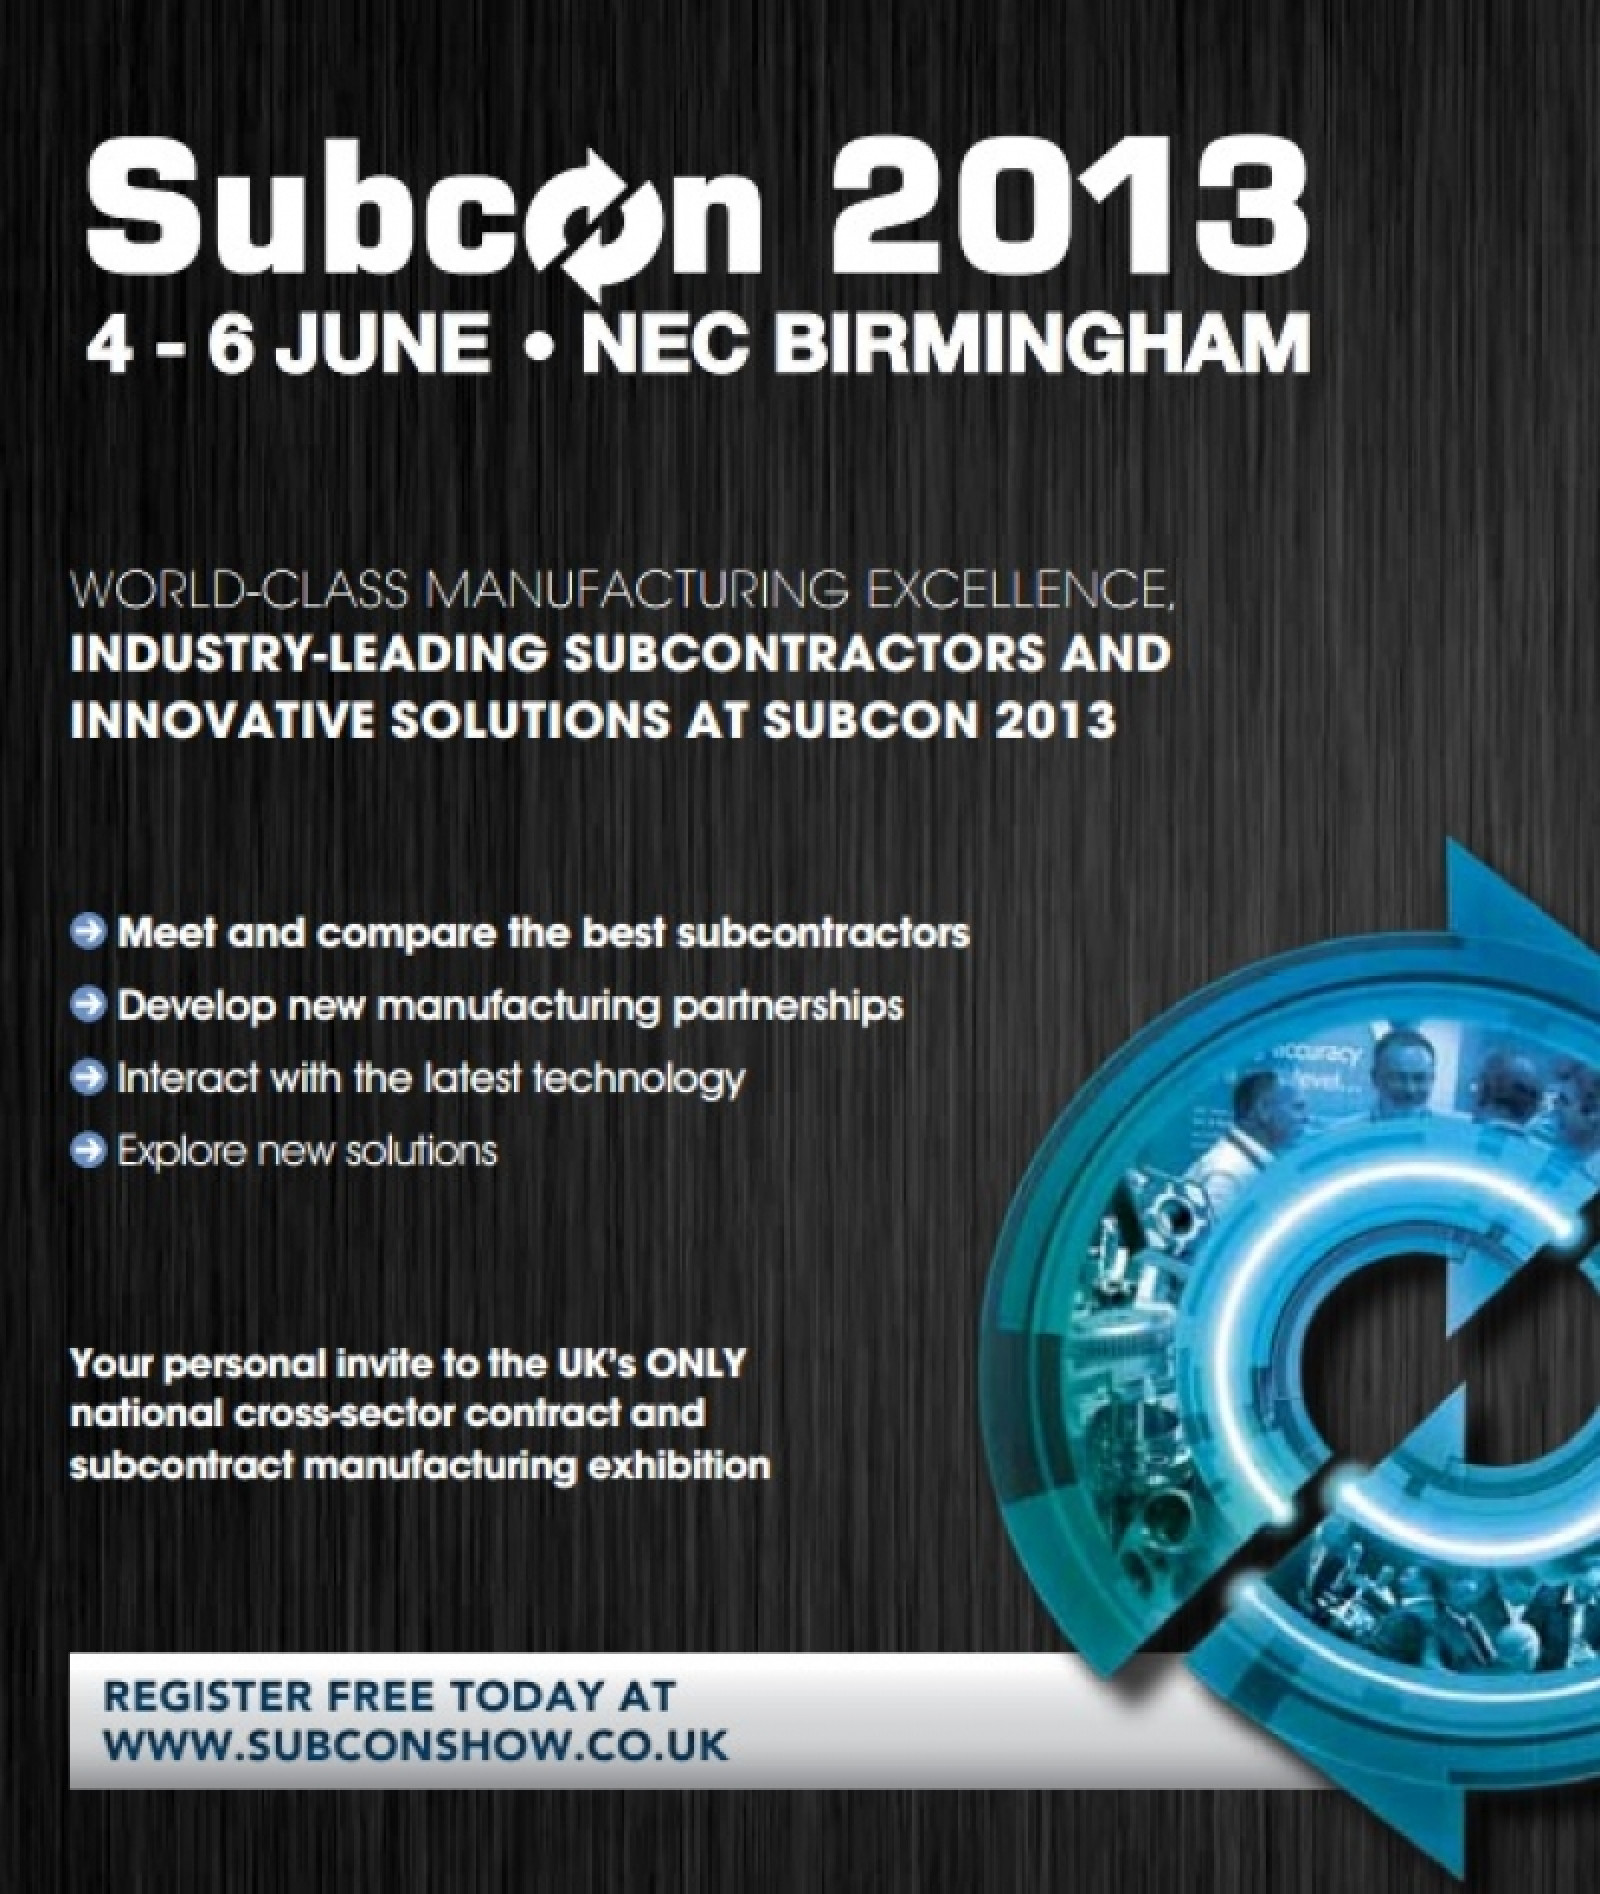 Download your personal invitation to Subcon 2013 and see what's on offer